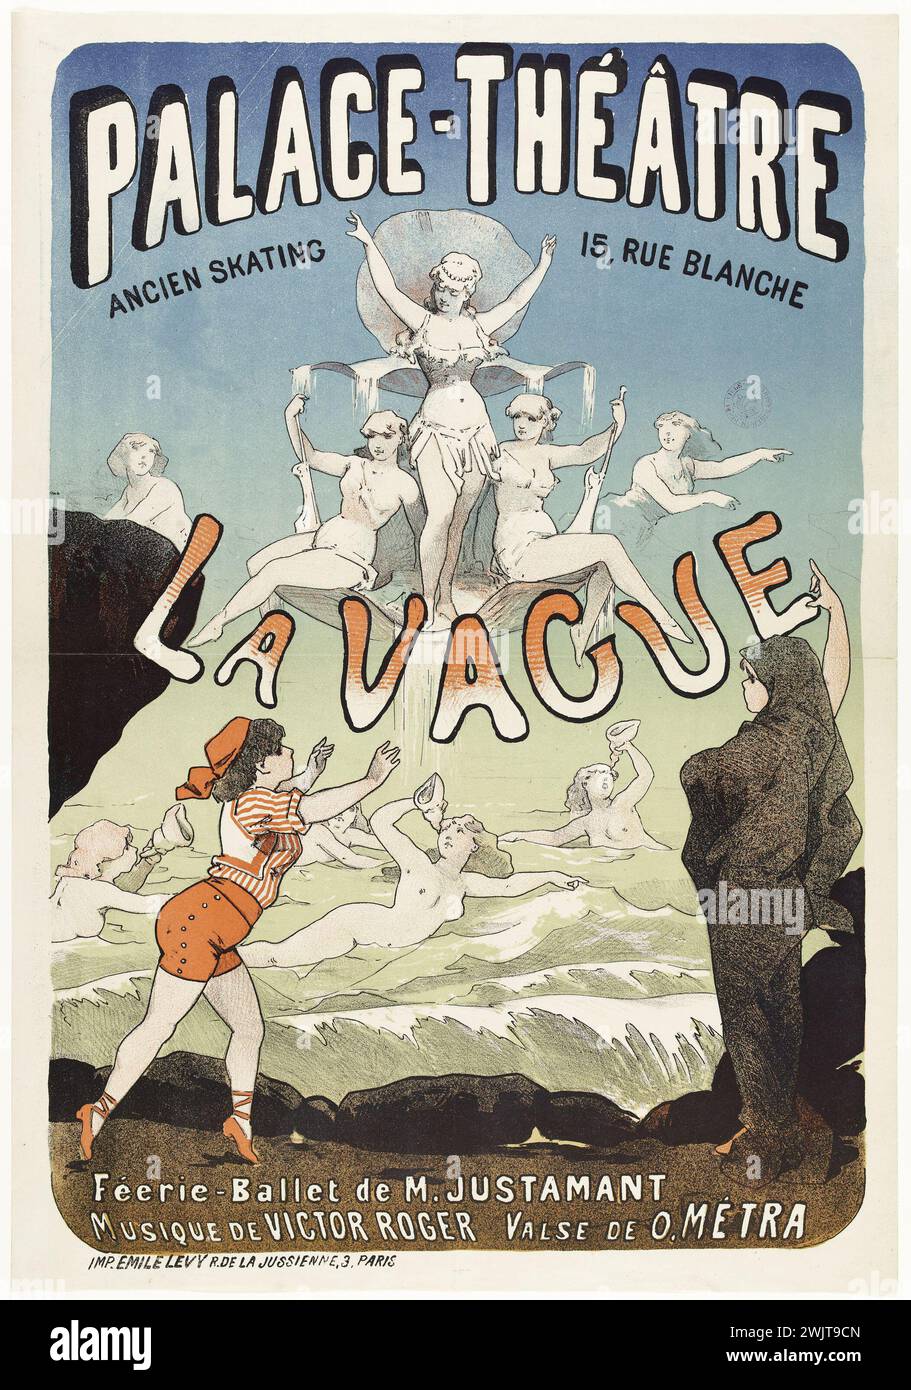 Anonymous. 'Palace-Theâtre, former skating, 15, rue Blanche, La Vague, Féerie-Ballet by M. Justamant, Music by Victor Roger, Waltz of O. Metra'. Color lithography. 1880-1900. Paris, Carnavalet museum. 74198-6 15 Rue Blanche, old skating, fery-ballet, the wave, color lithography, palace-theater Stock Photo